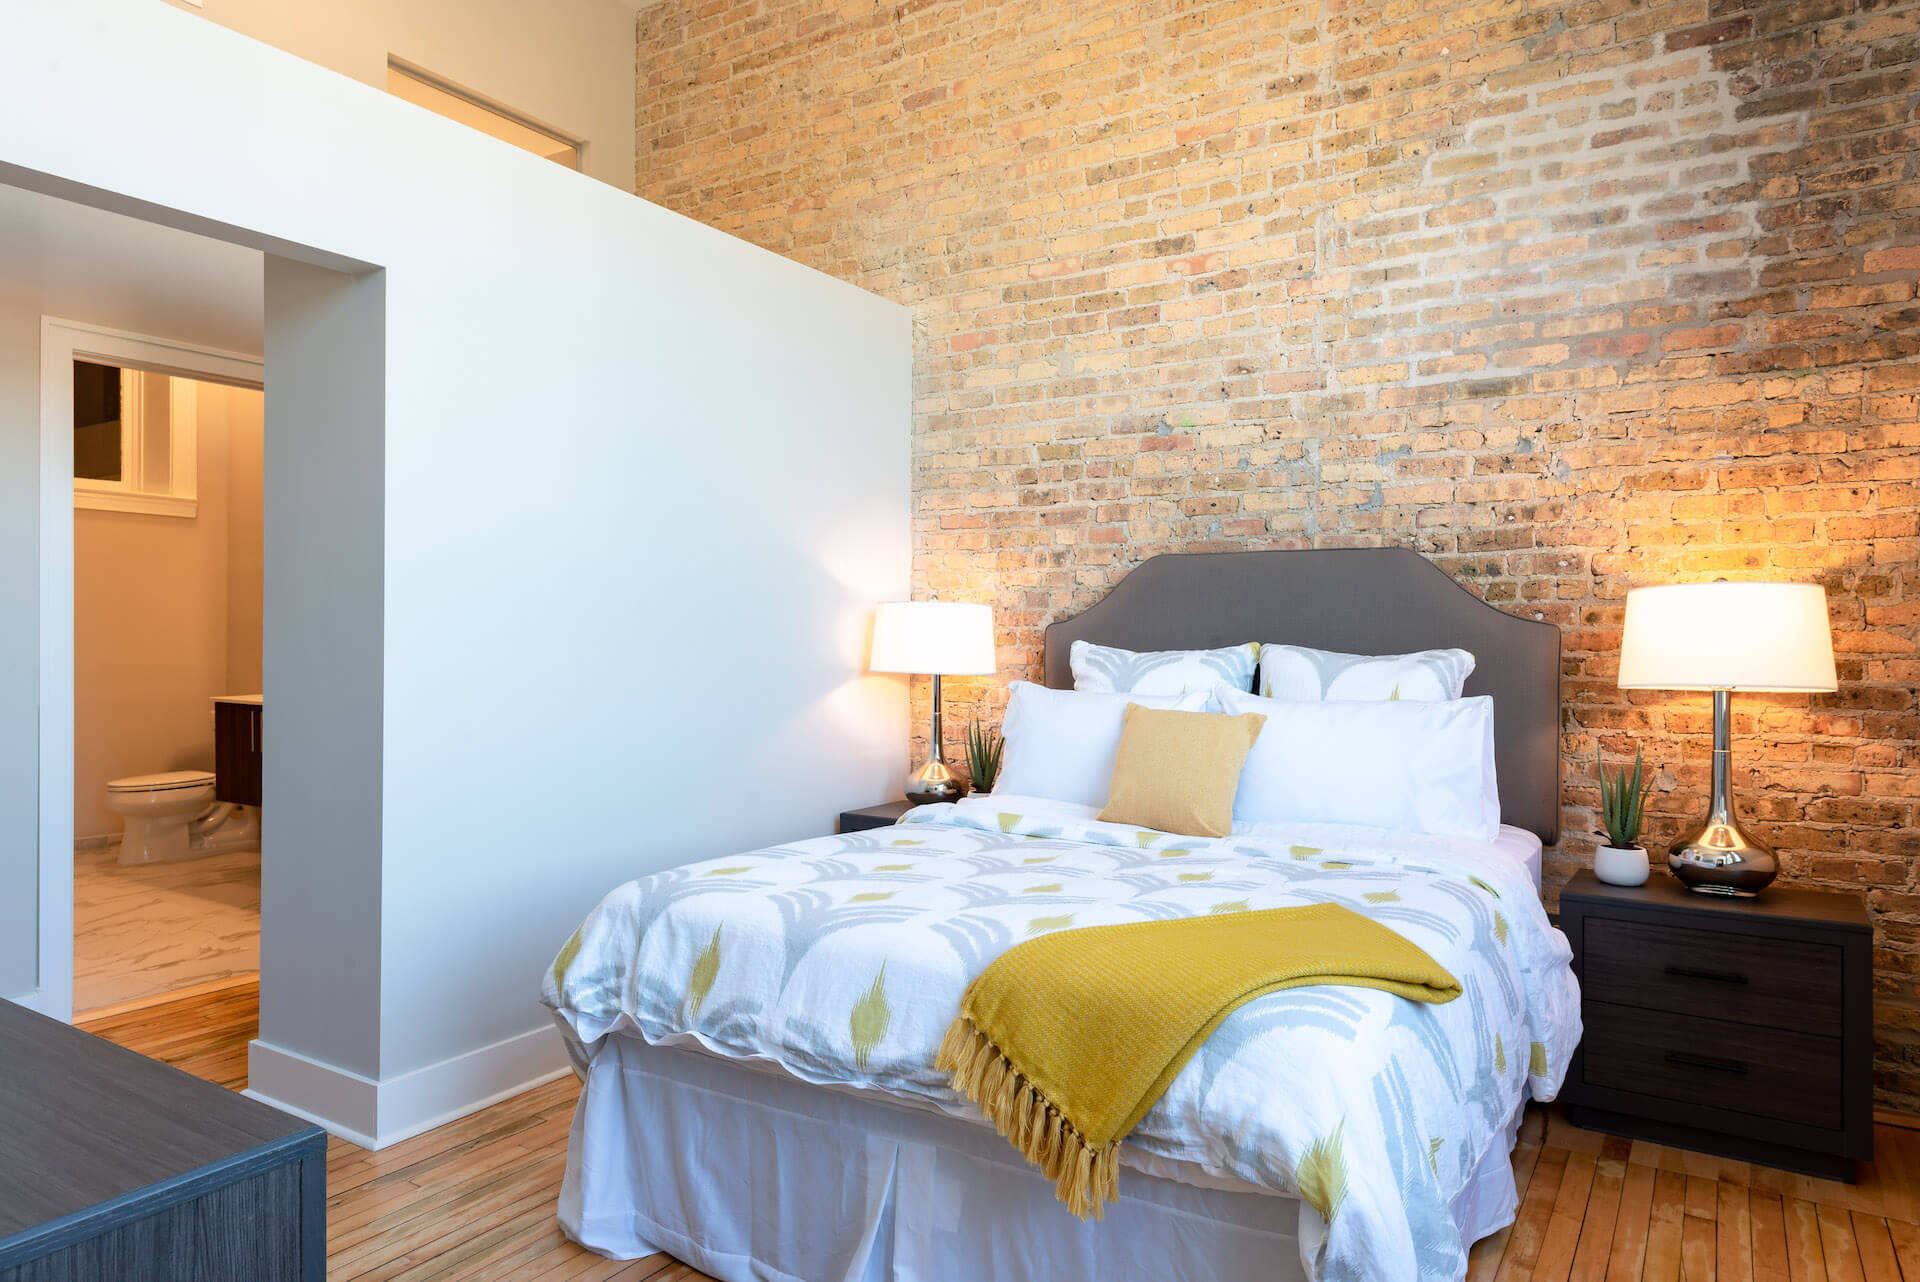 Main bedroom with wood flooring, large window, high ceiling, exposed brick wall, and doorway to walk-in closet and adjoining bathroom.